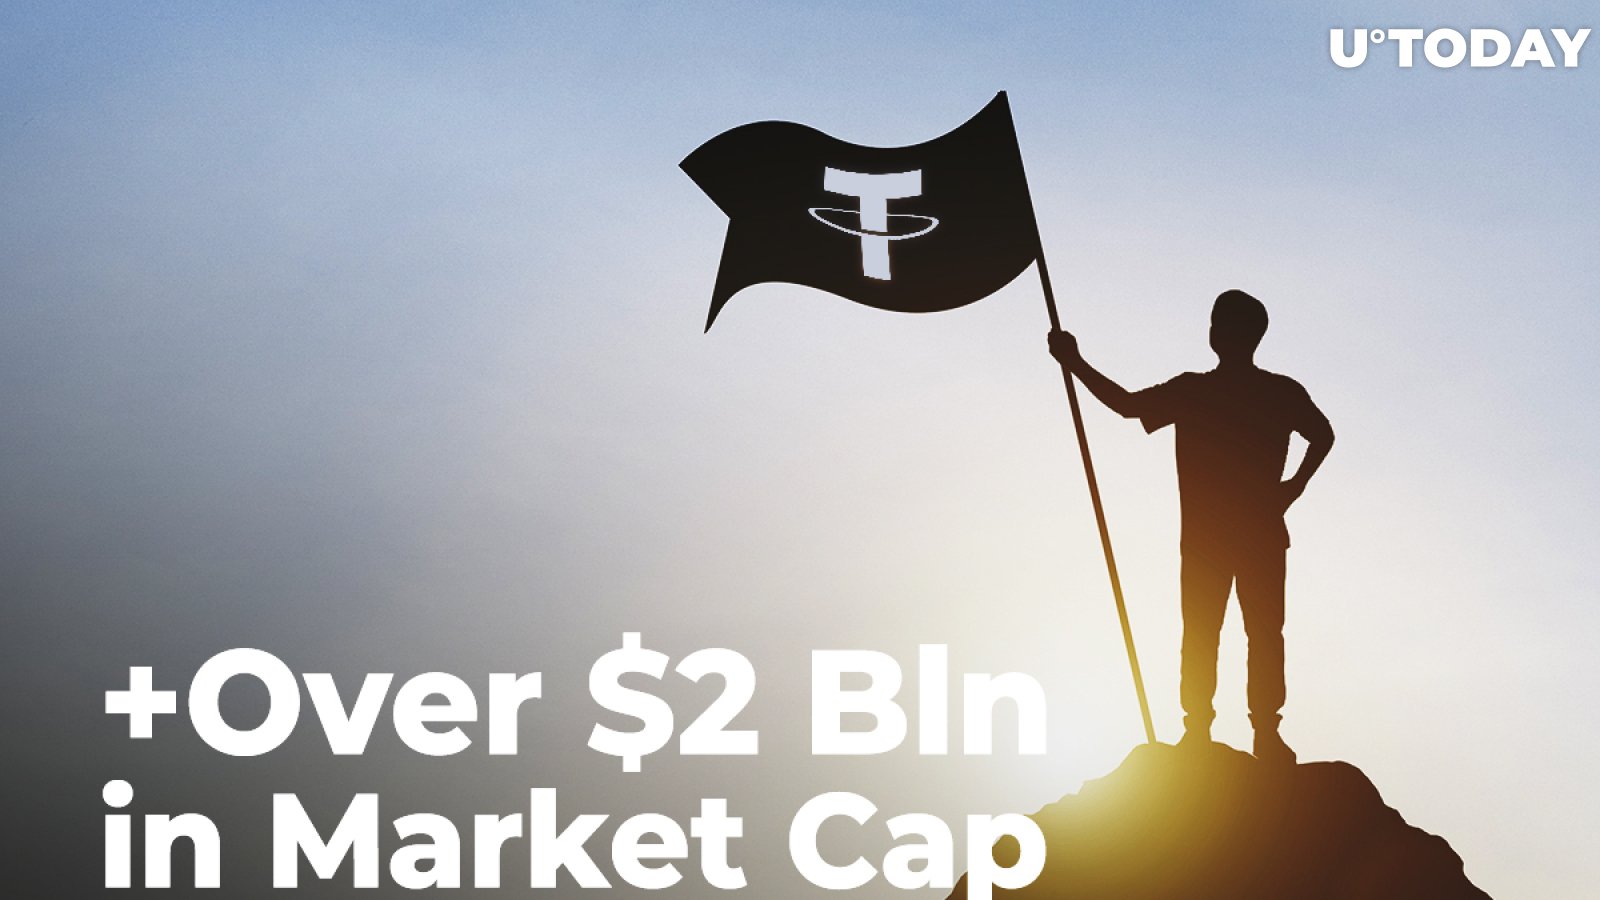 Tether Adds Over $2 Bln in Market Cap: USDC Has as Much as 2nd Largest Stablecoin in Total